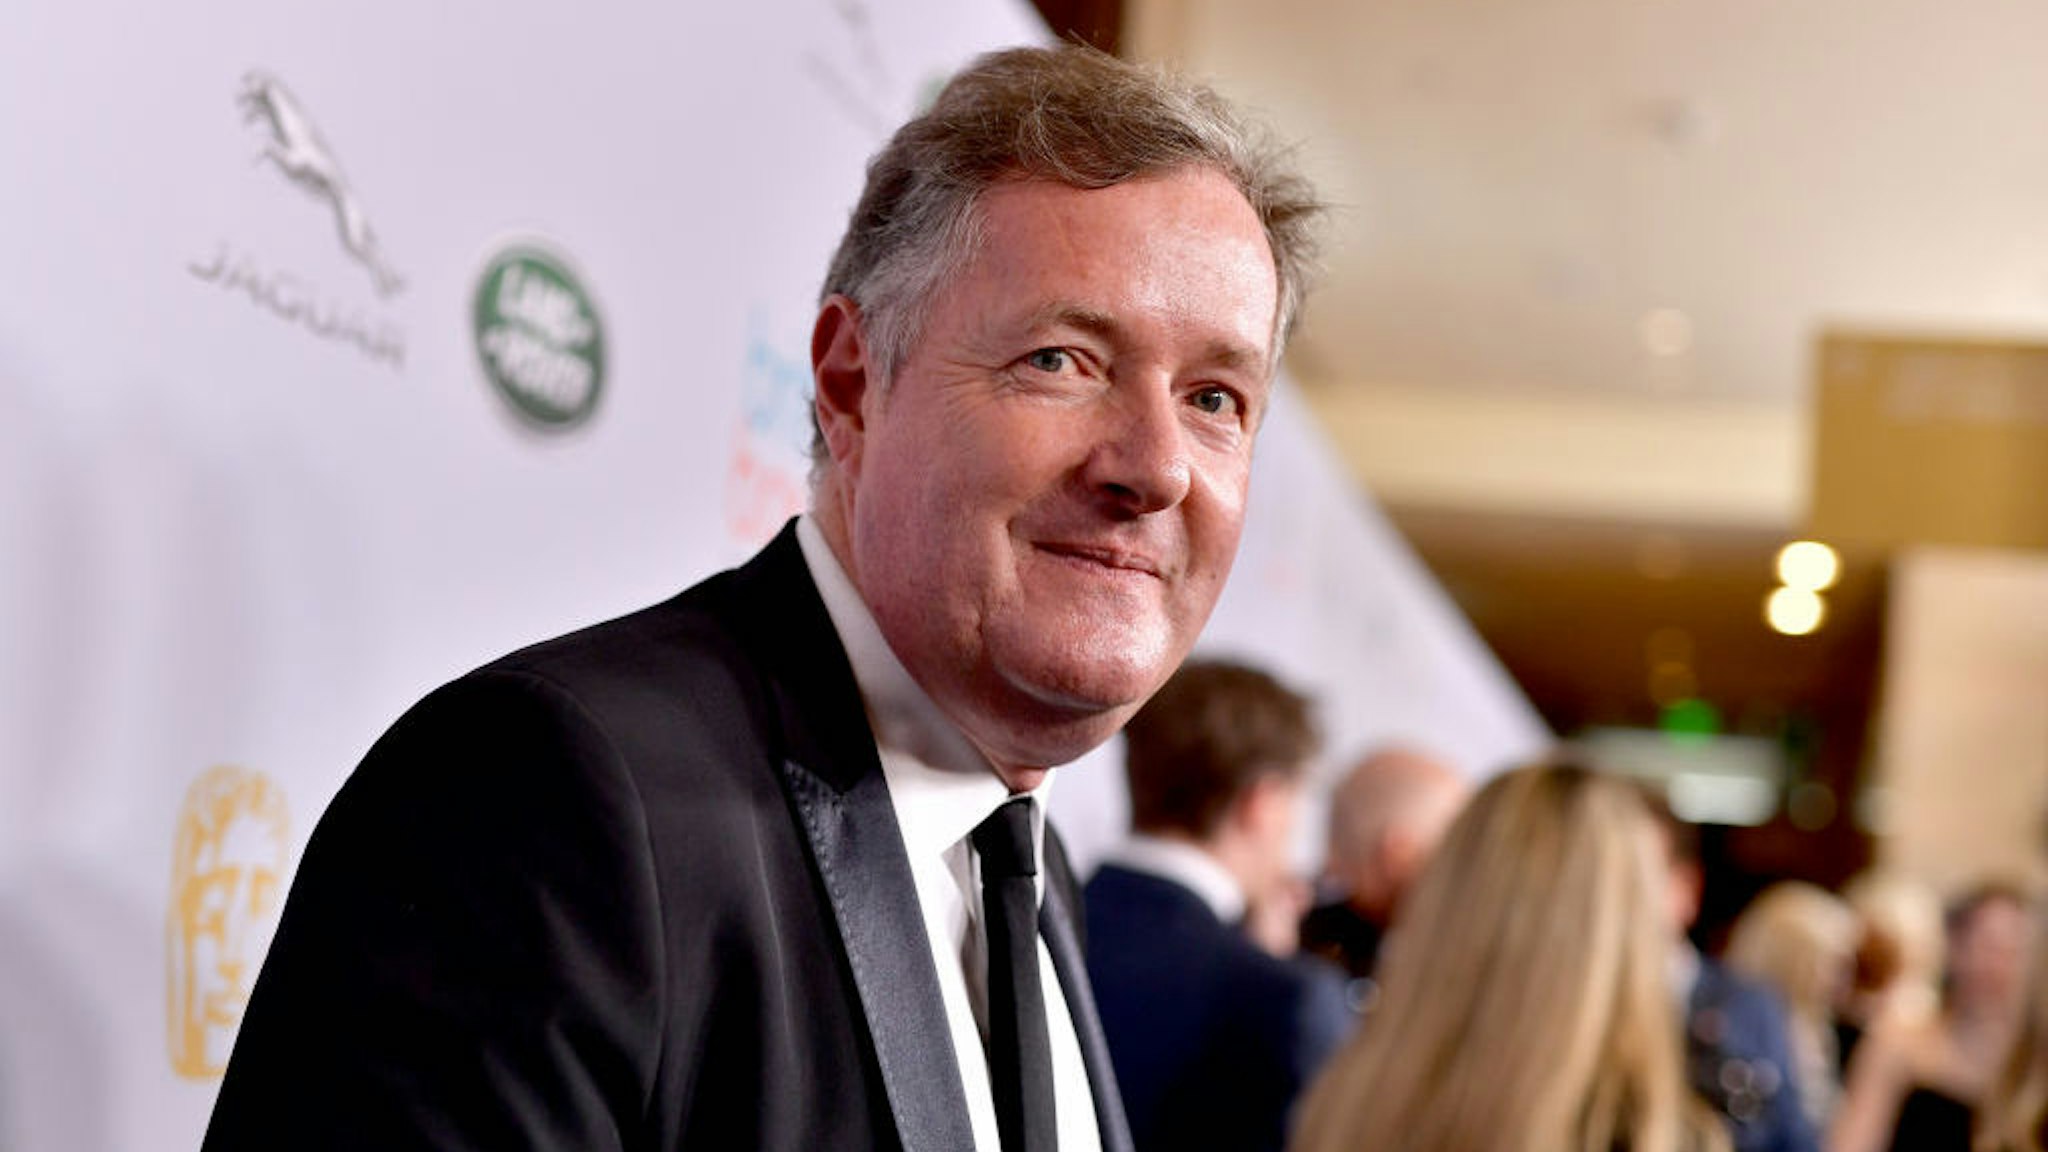 BEVERLY HILLS, CALIFORNIA - OCTOBER 25: Piers Morgan attends the 2019 British Academy Britannia Awards presented by American Airlines and Jaguar Land Rover at The Beverly Hilton Hotel on October 25, 2019 in Beverly Hills, California. (Photo by Emma McIntyre/BAFTA LA/Getty Images for BAFTA LA)